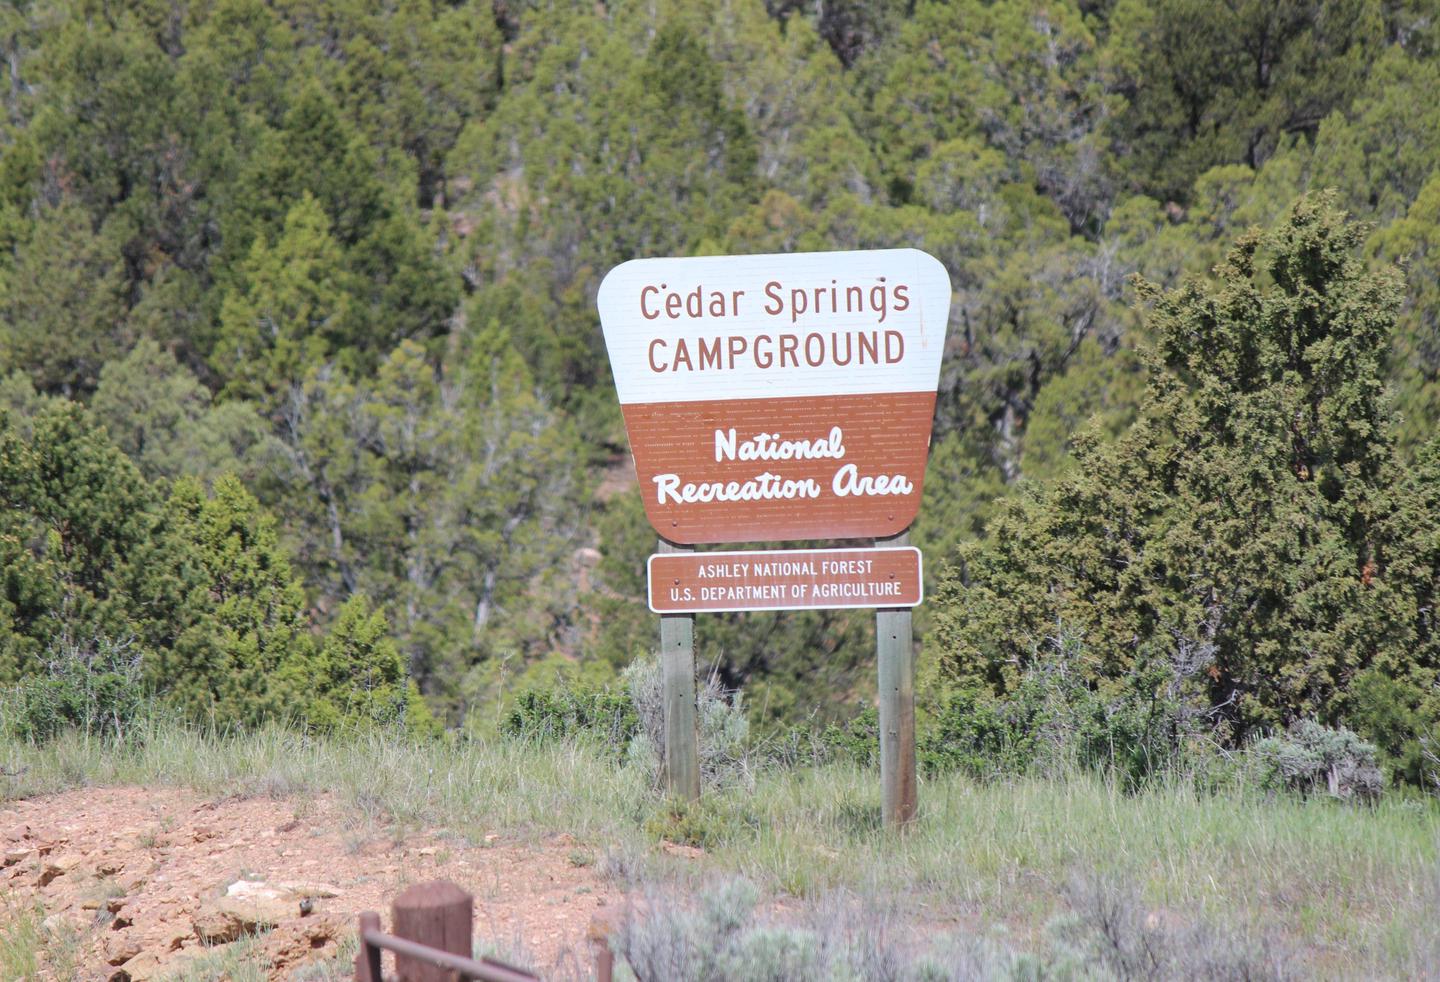 Cedar Springs Campground sign at the entrance of the campground.Cedar Springs Campground